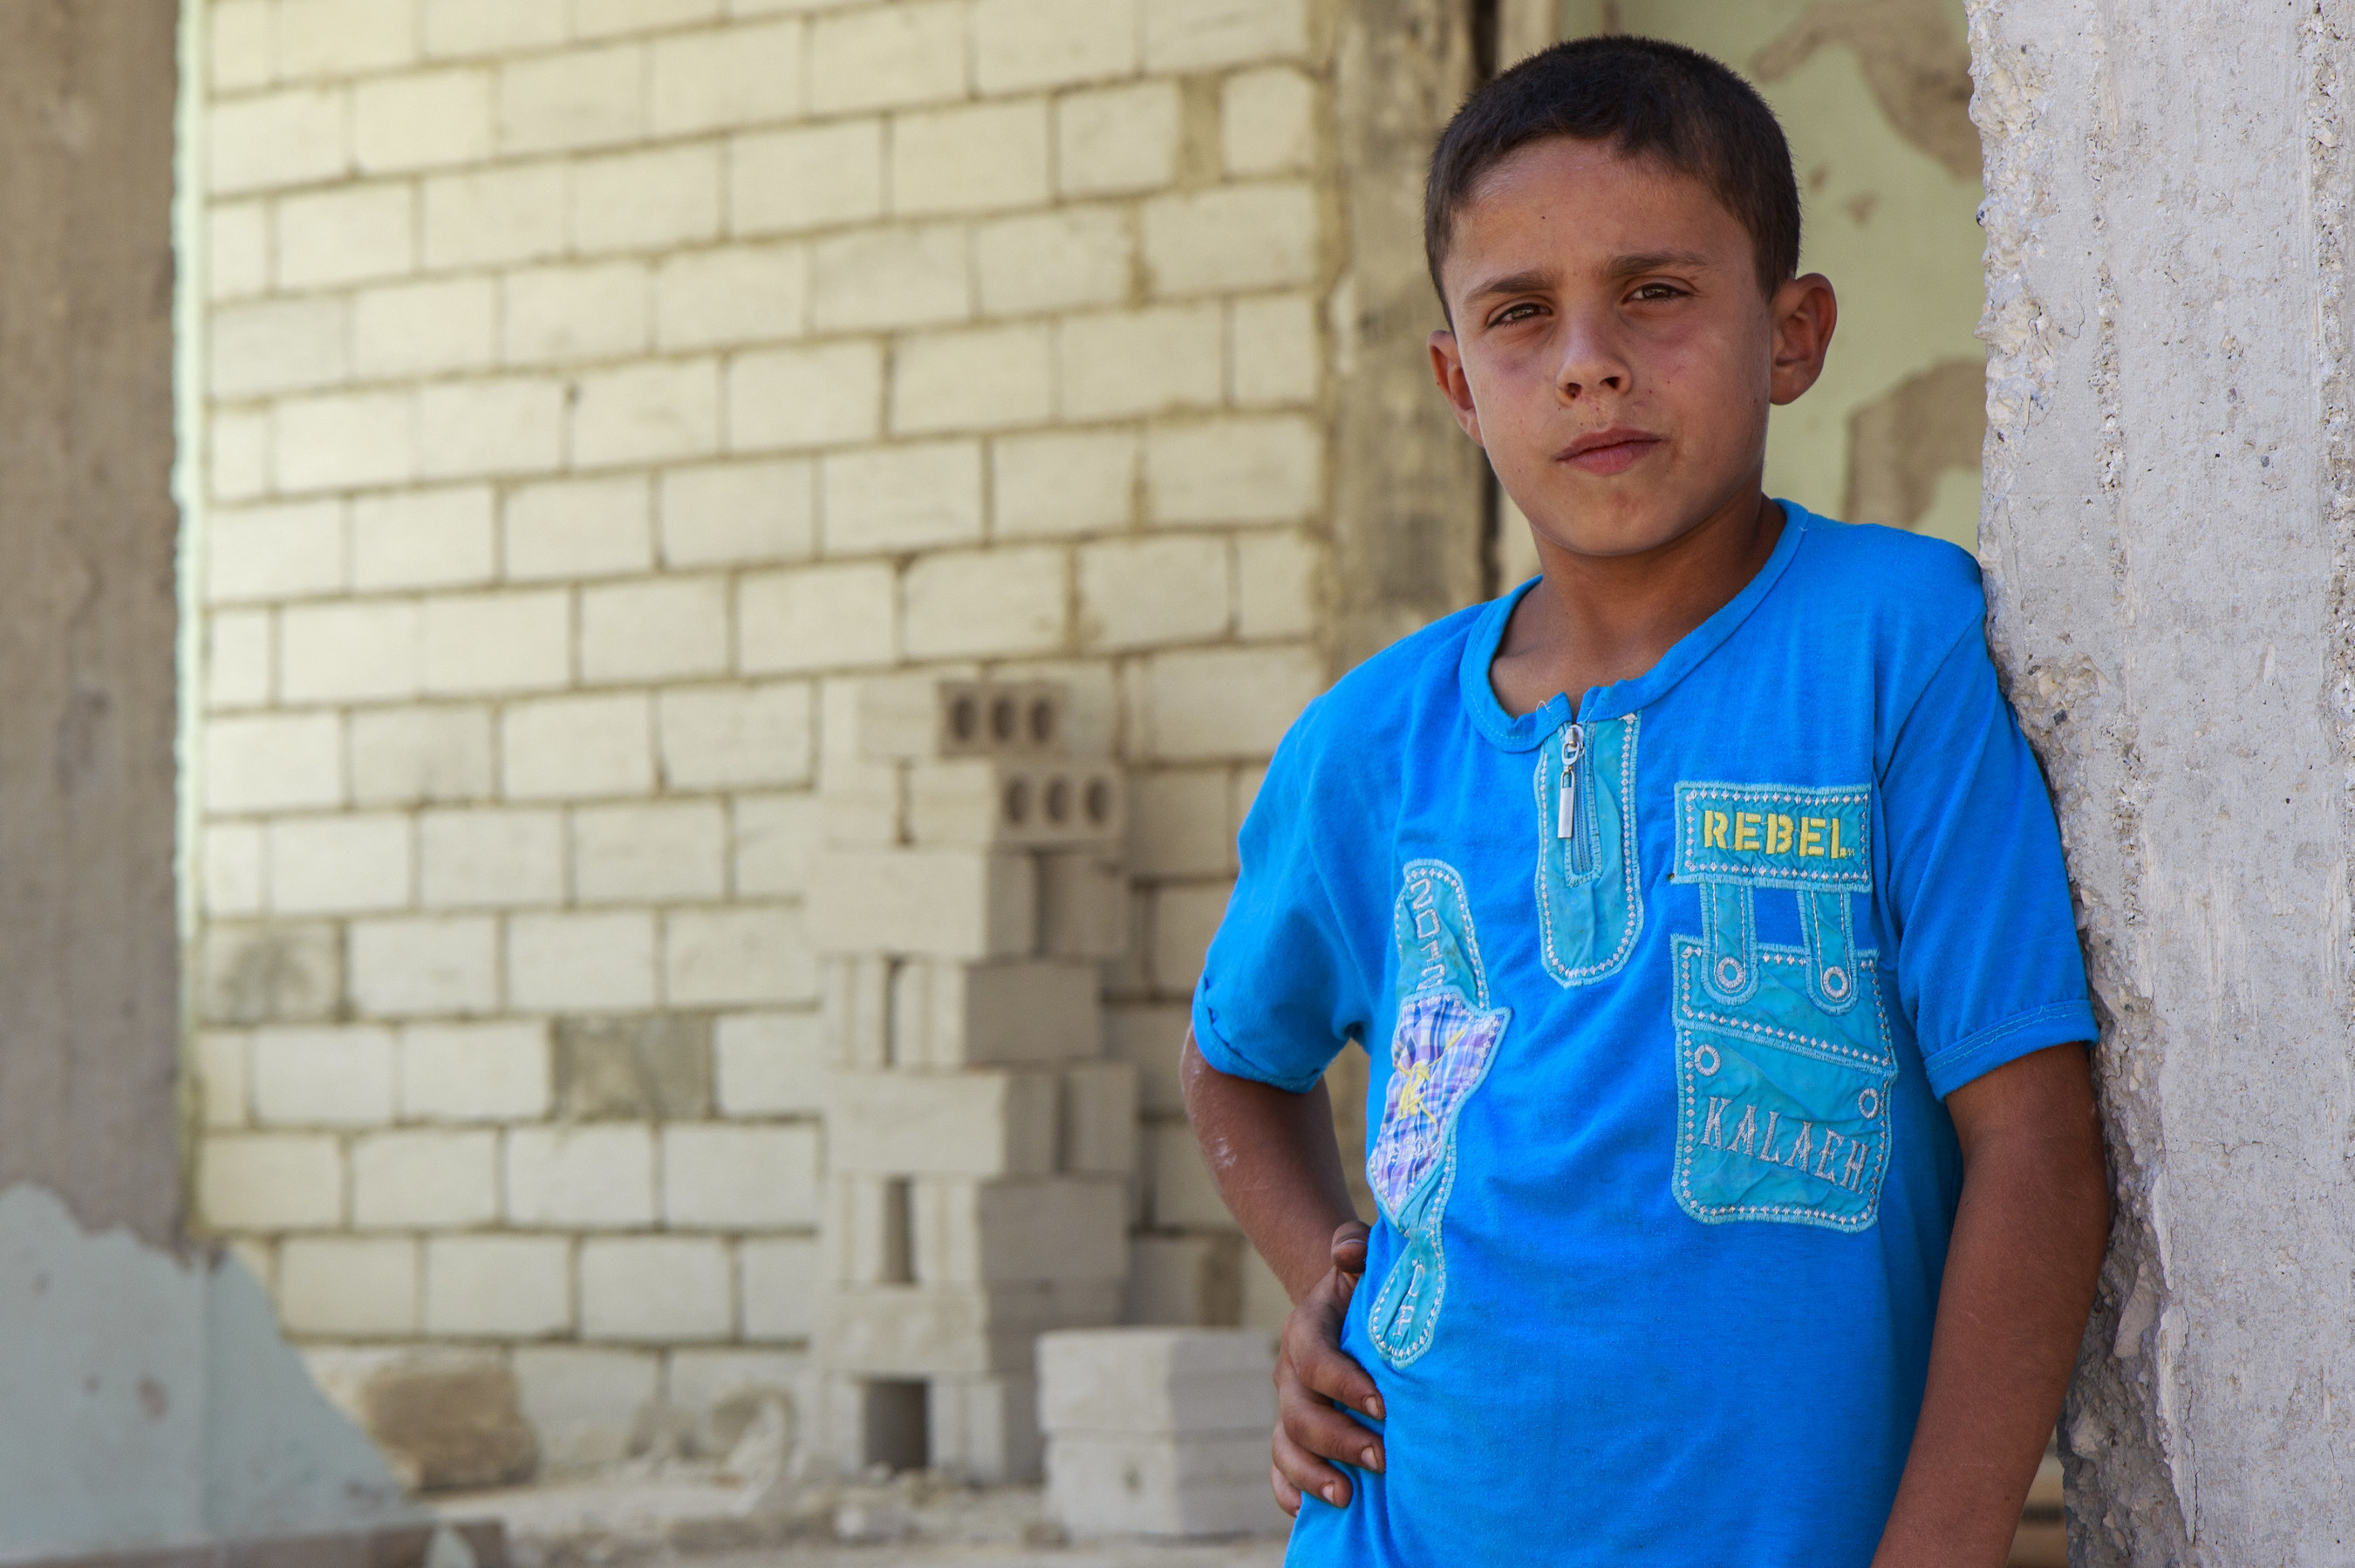 Kareem*'s school, in the suburbs of northern Syria, was attacked by missiles in March 2015, while he and his fellow classmates were at school. Photo by Ahmad Baroudi/Save the Children (* after a name indicates that the name has been changed to protect identity).